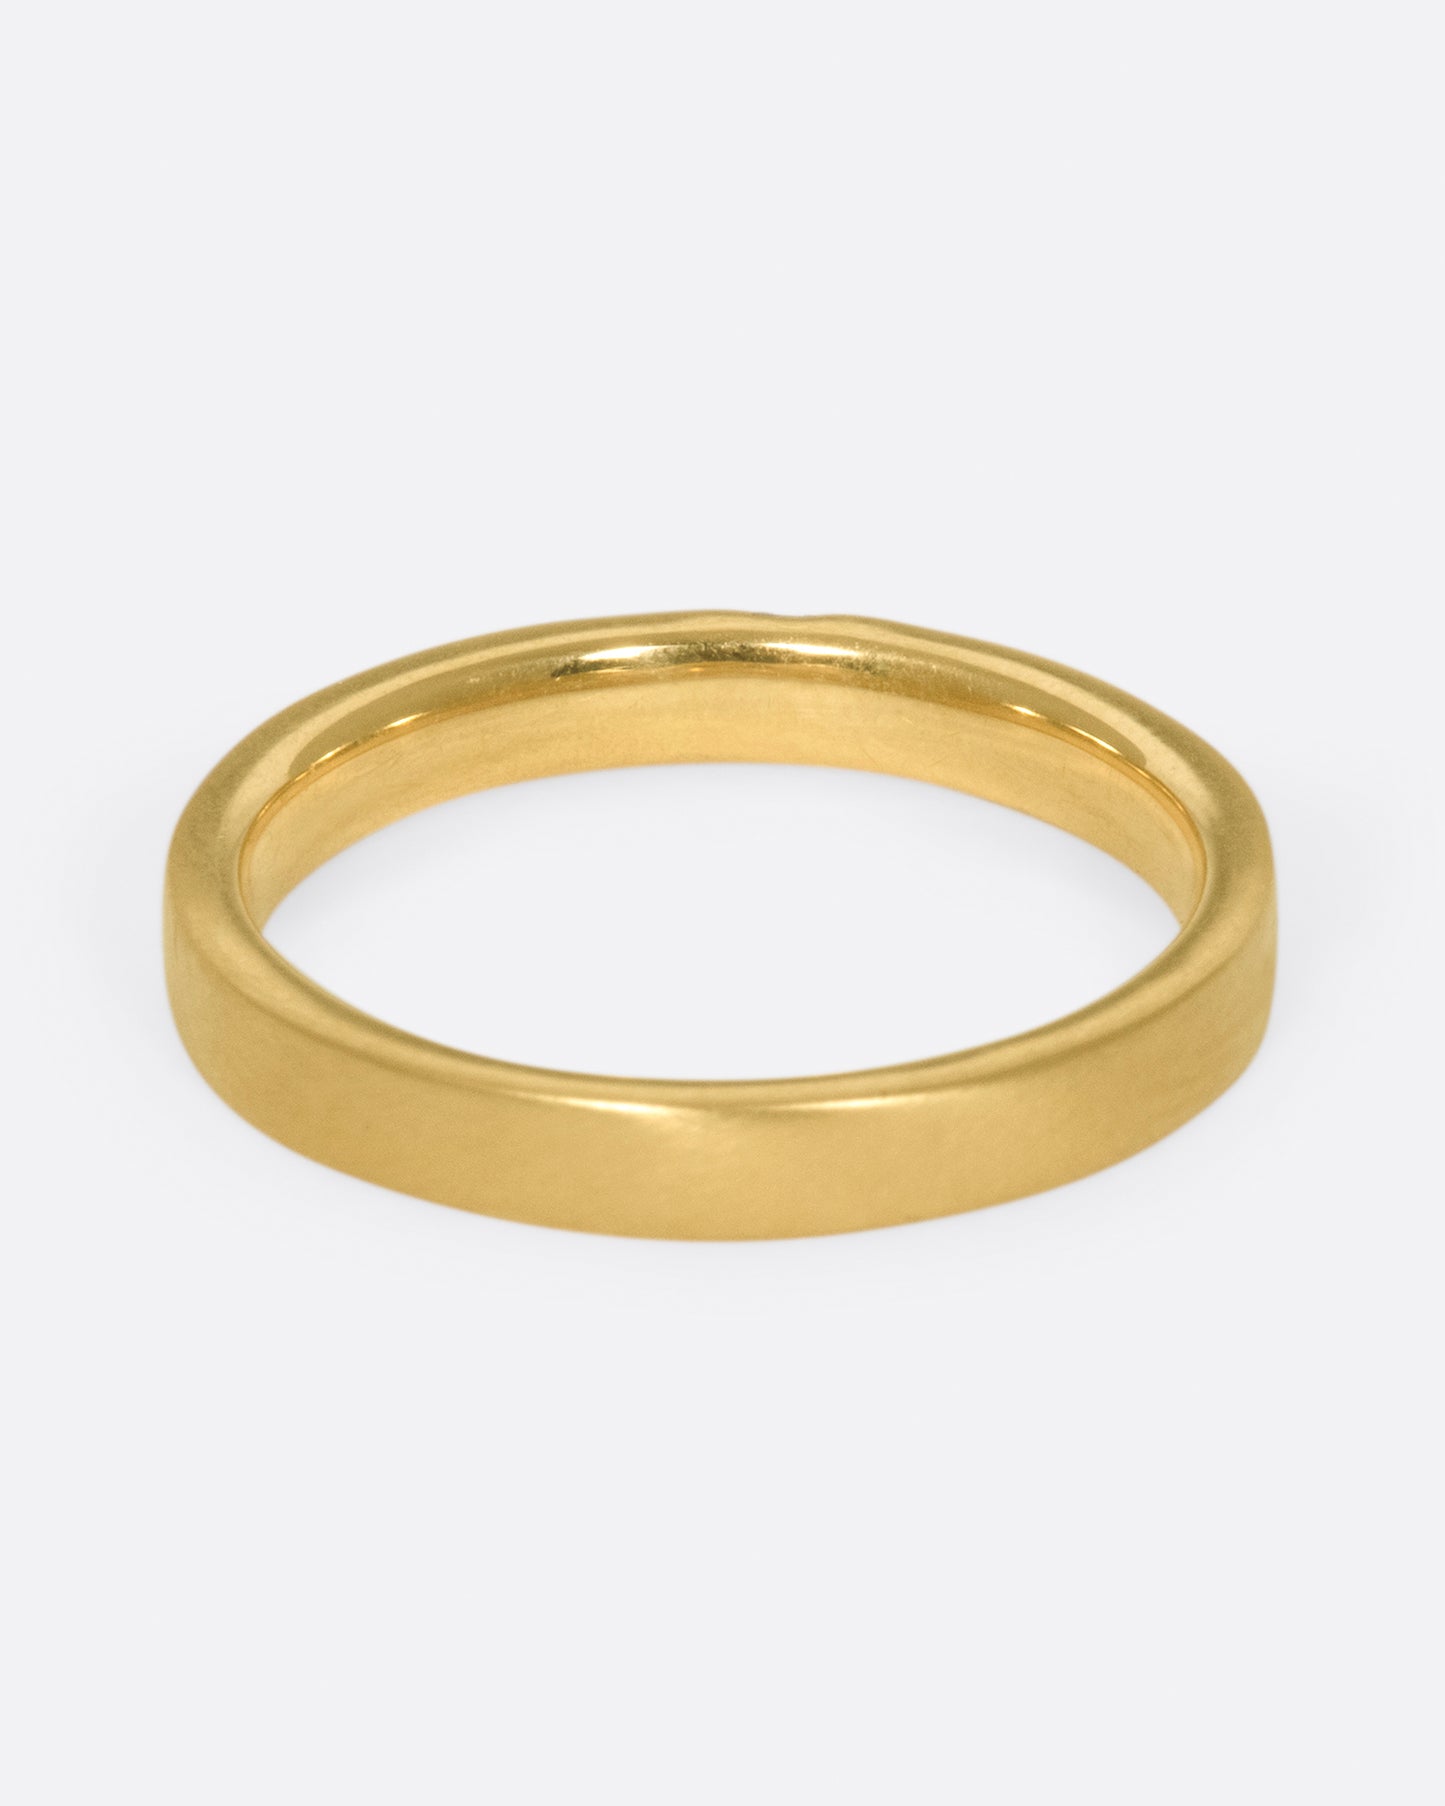 A matte gold band cast in a simple silhouette, featuring one needle baguette-cut diamond for that extra flare.